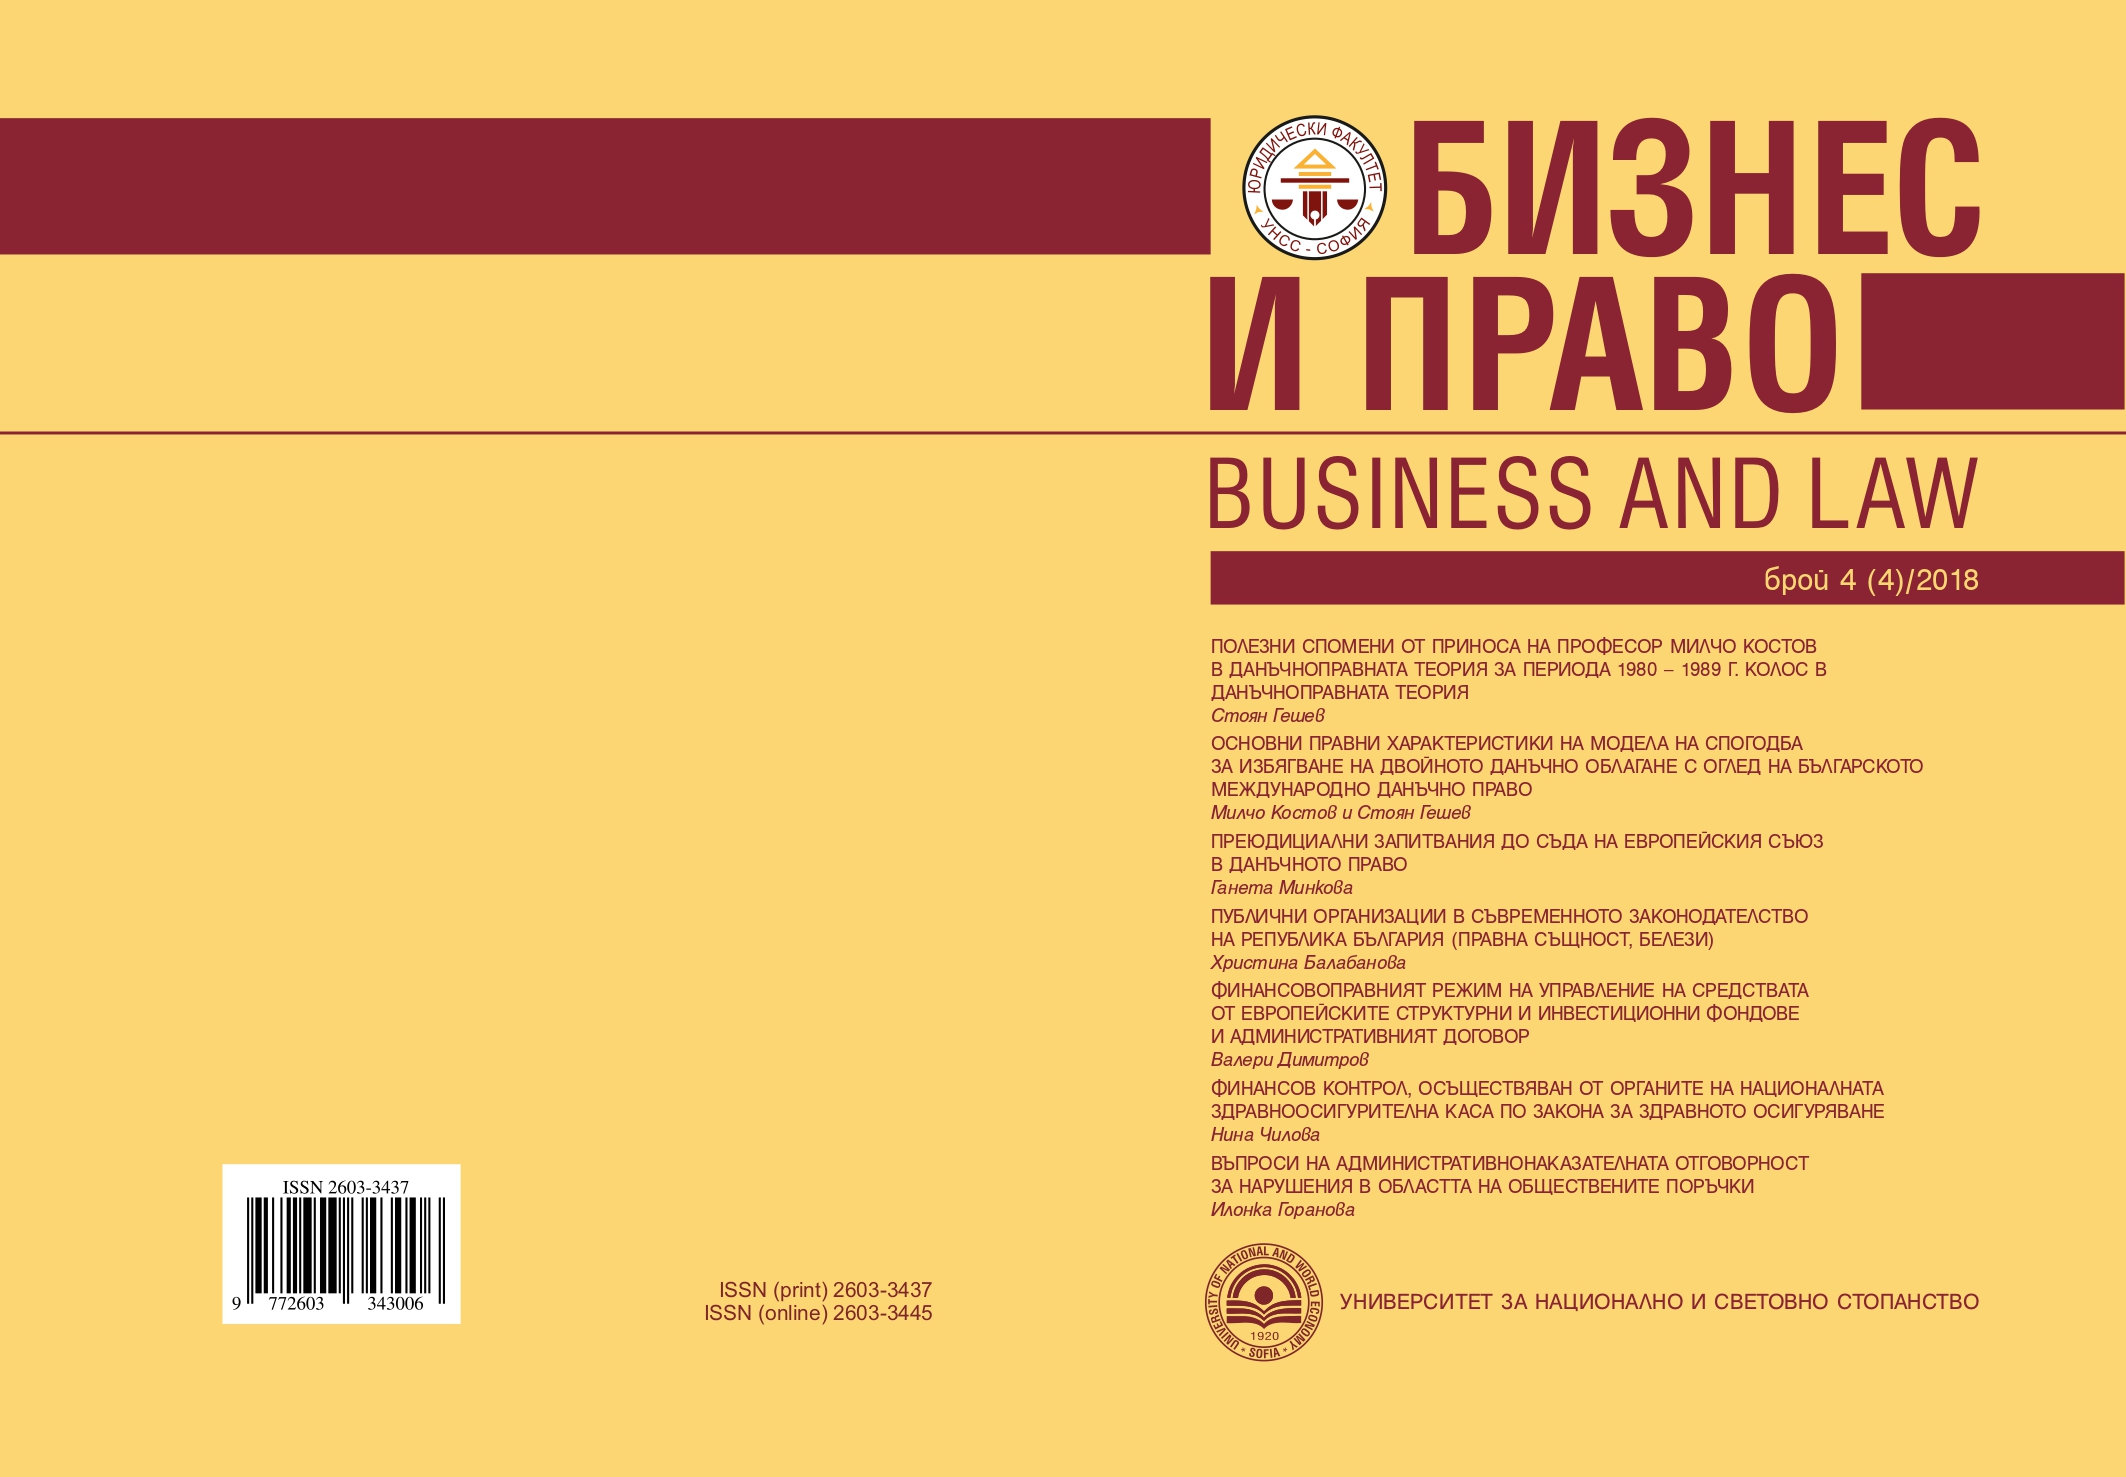 The Public Organisations in the Contemporary Legislation of the Republic of Bulgaria (Legal Nature, Characteristics) Cover Image